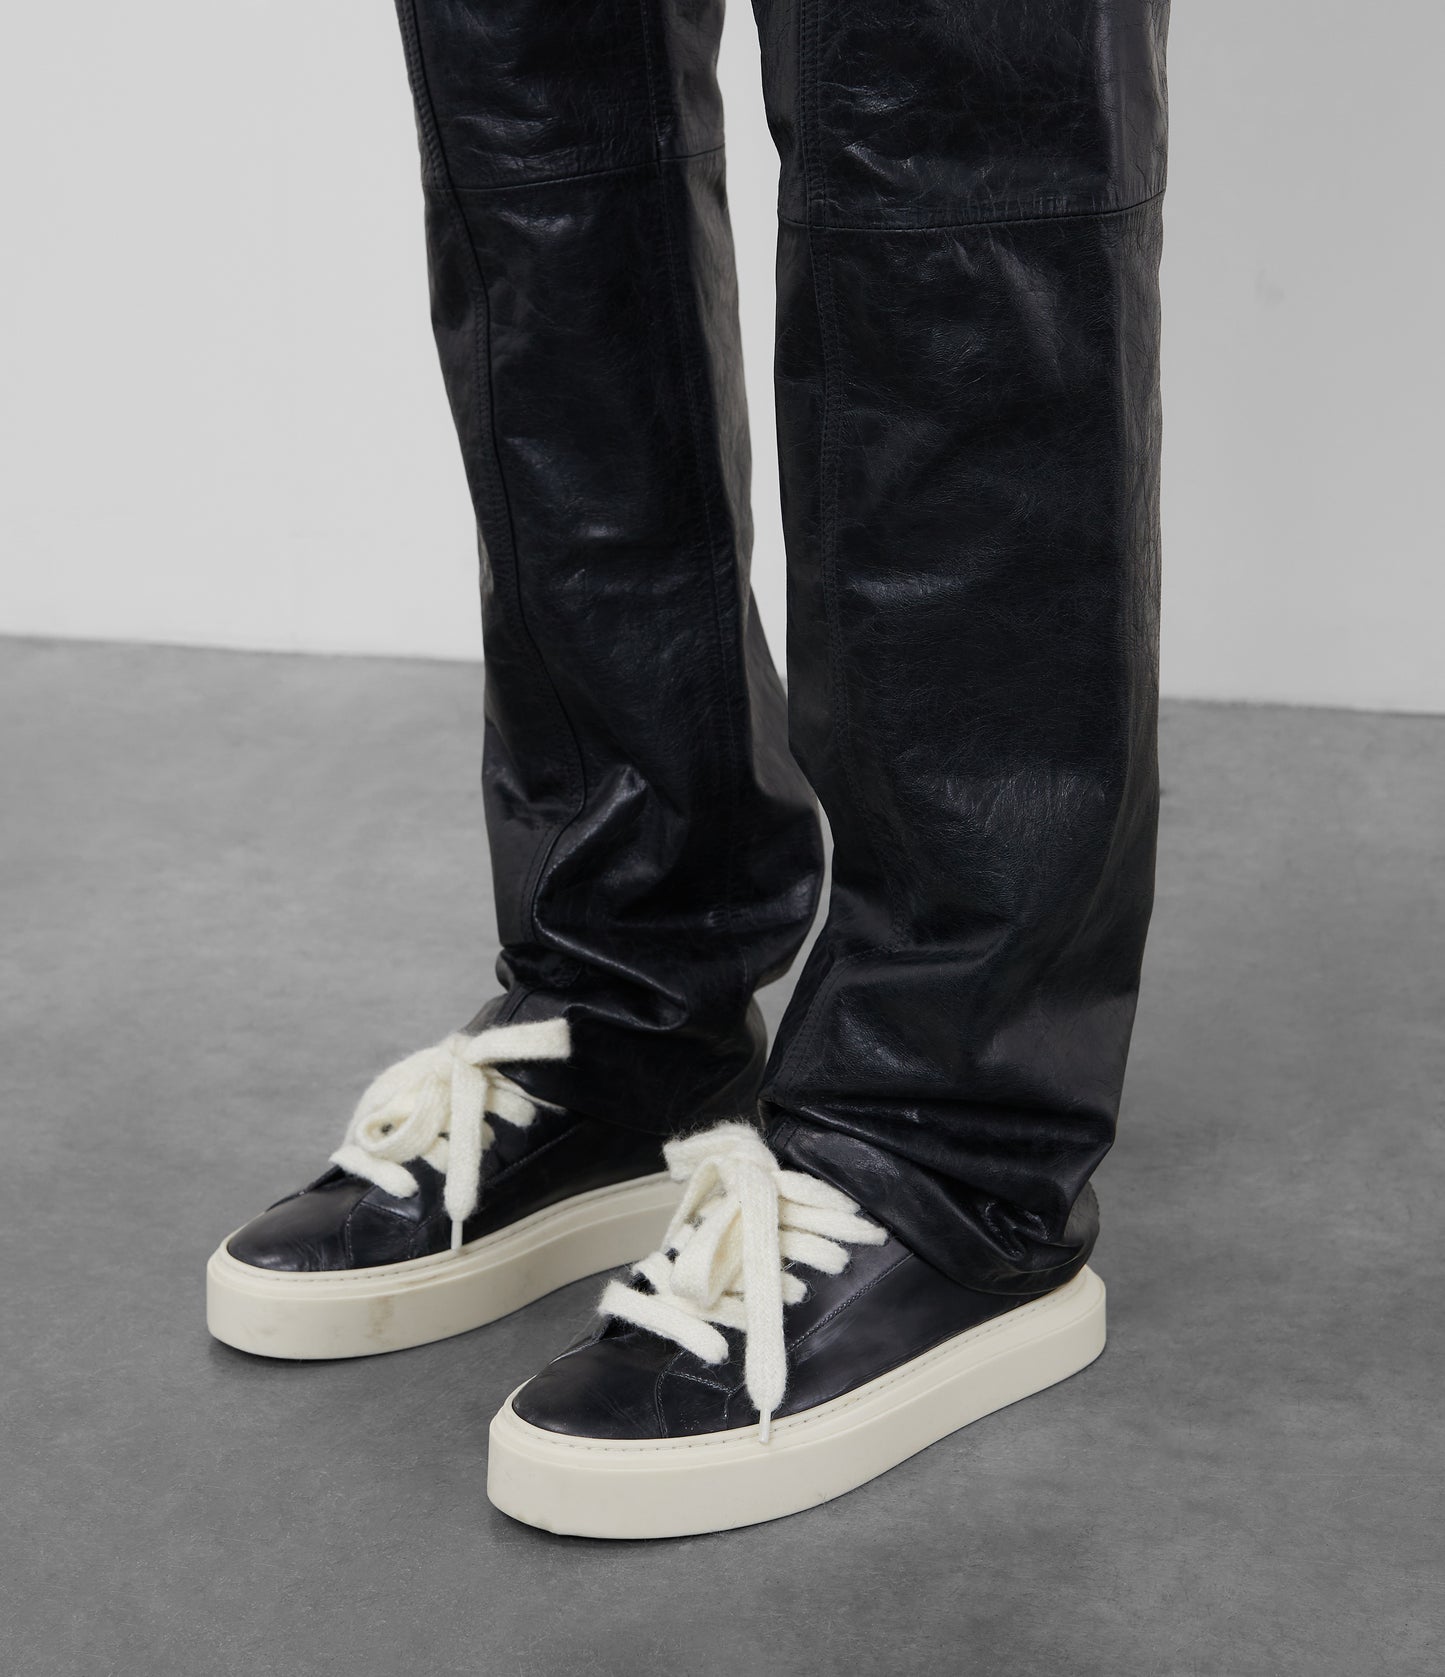 LEATHER STACKED CARPENTER PANT